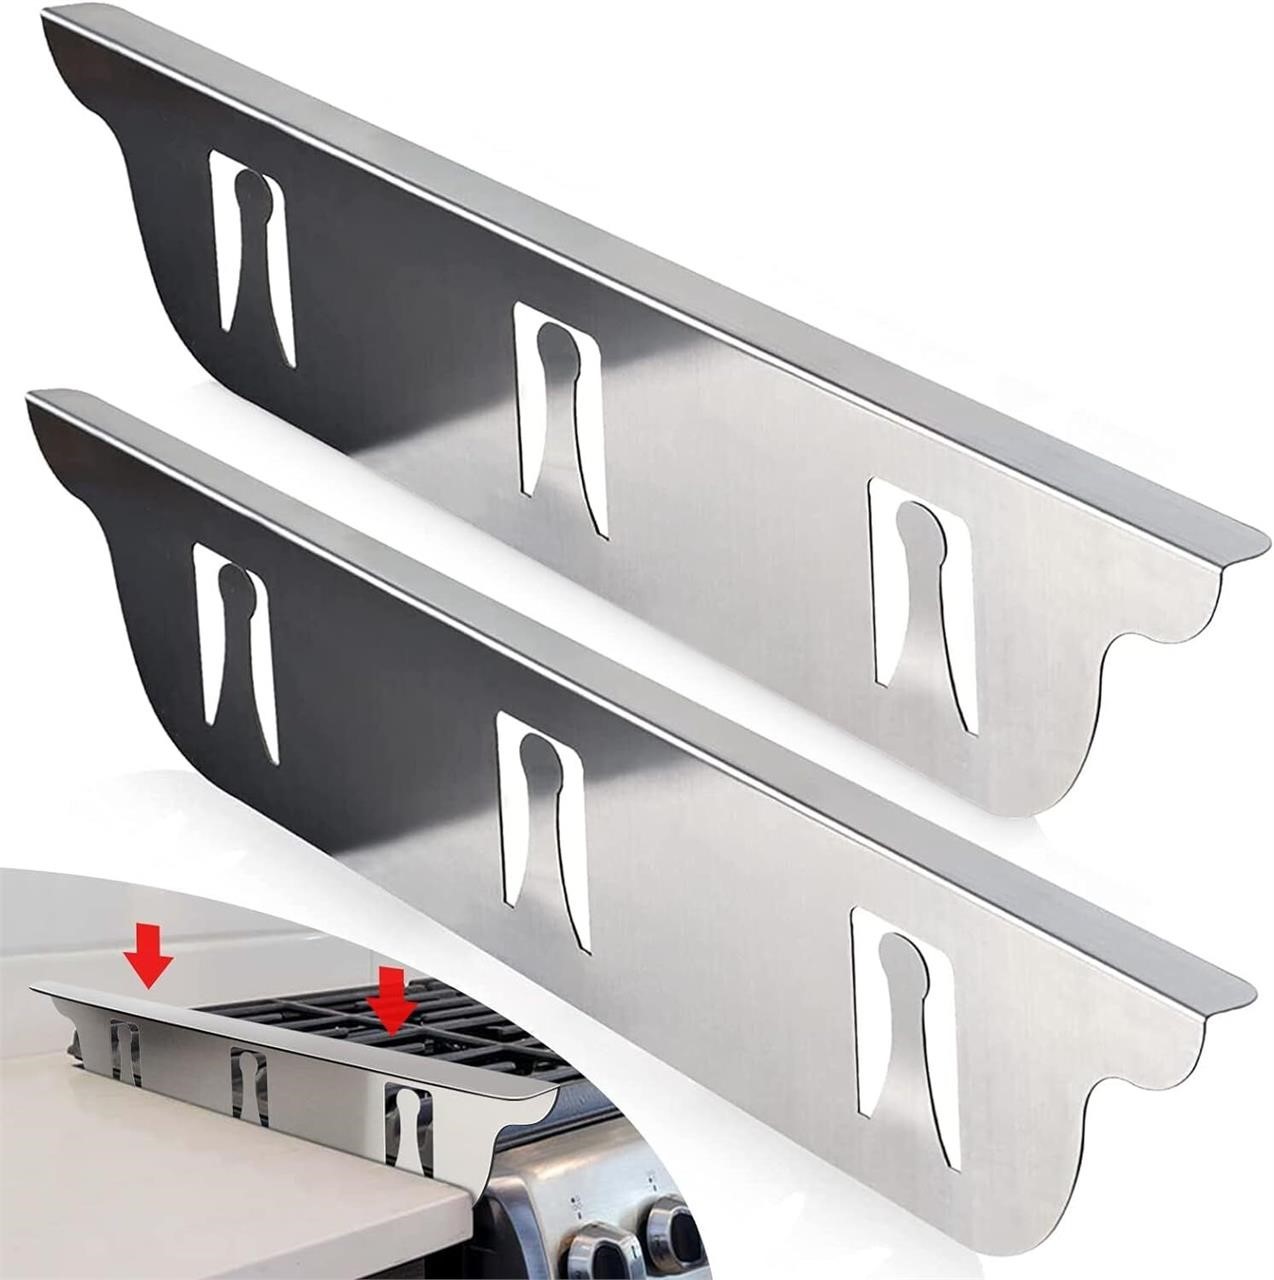 Stainless Steel Stove Gap Covers (2 pcs)